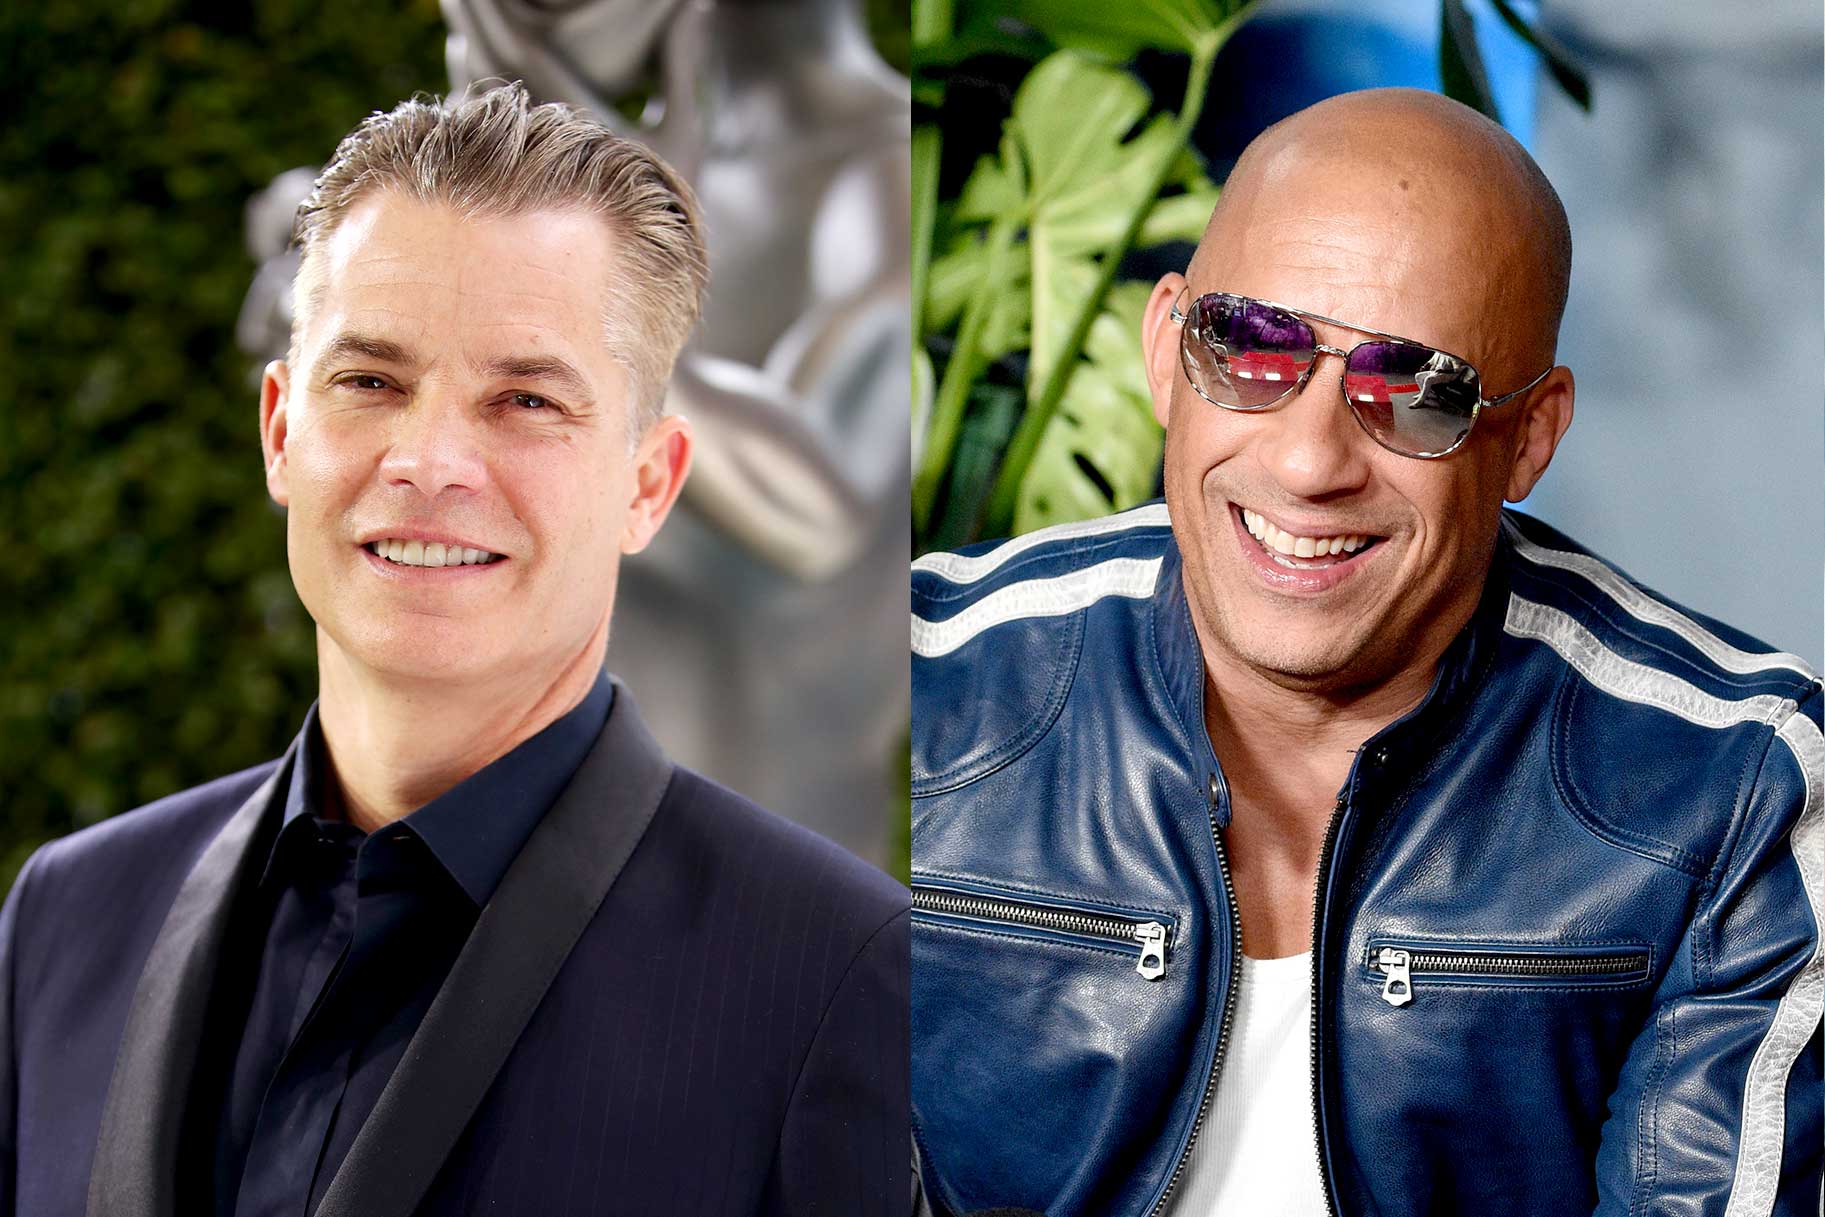 Fast & Furious' Cast Then & Now: Photos Of Vin Diesel & More